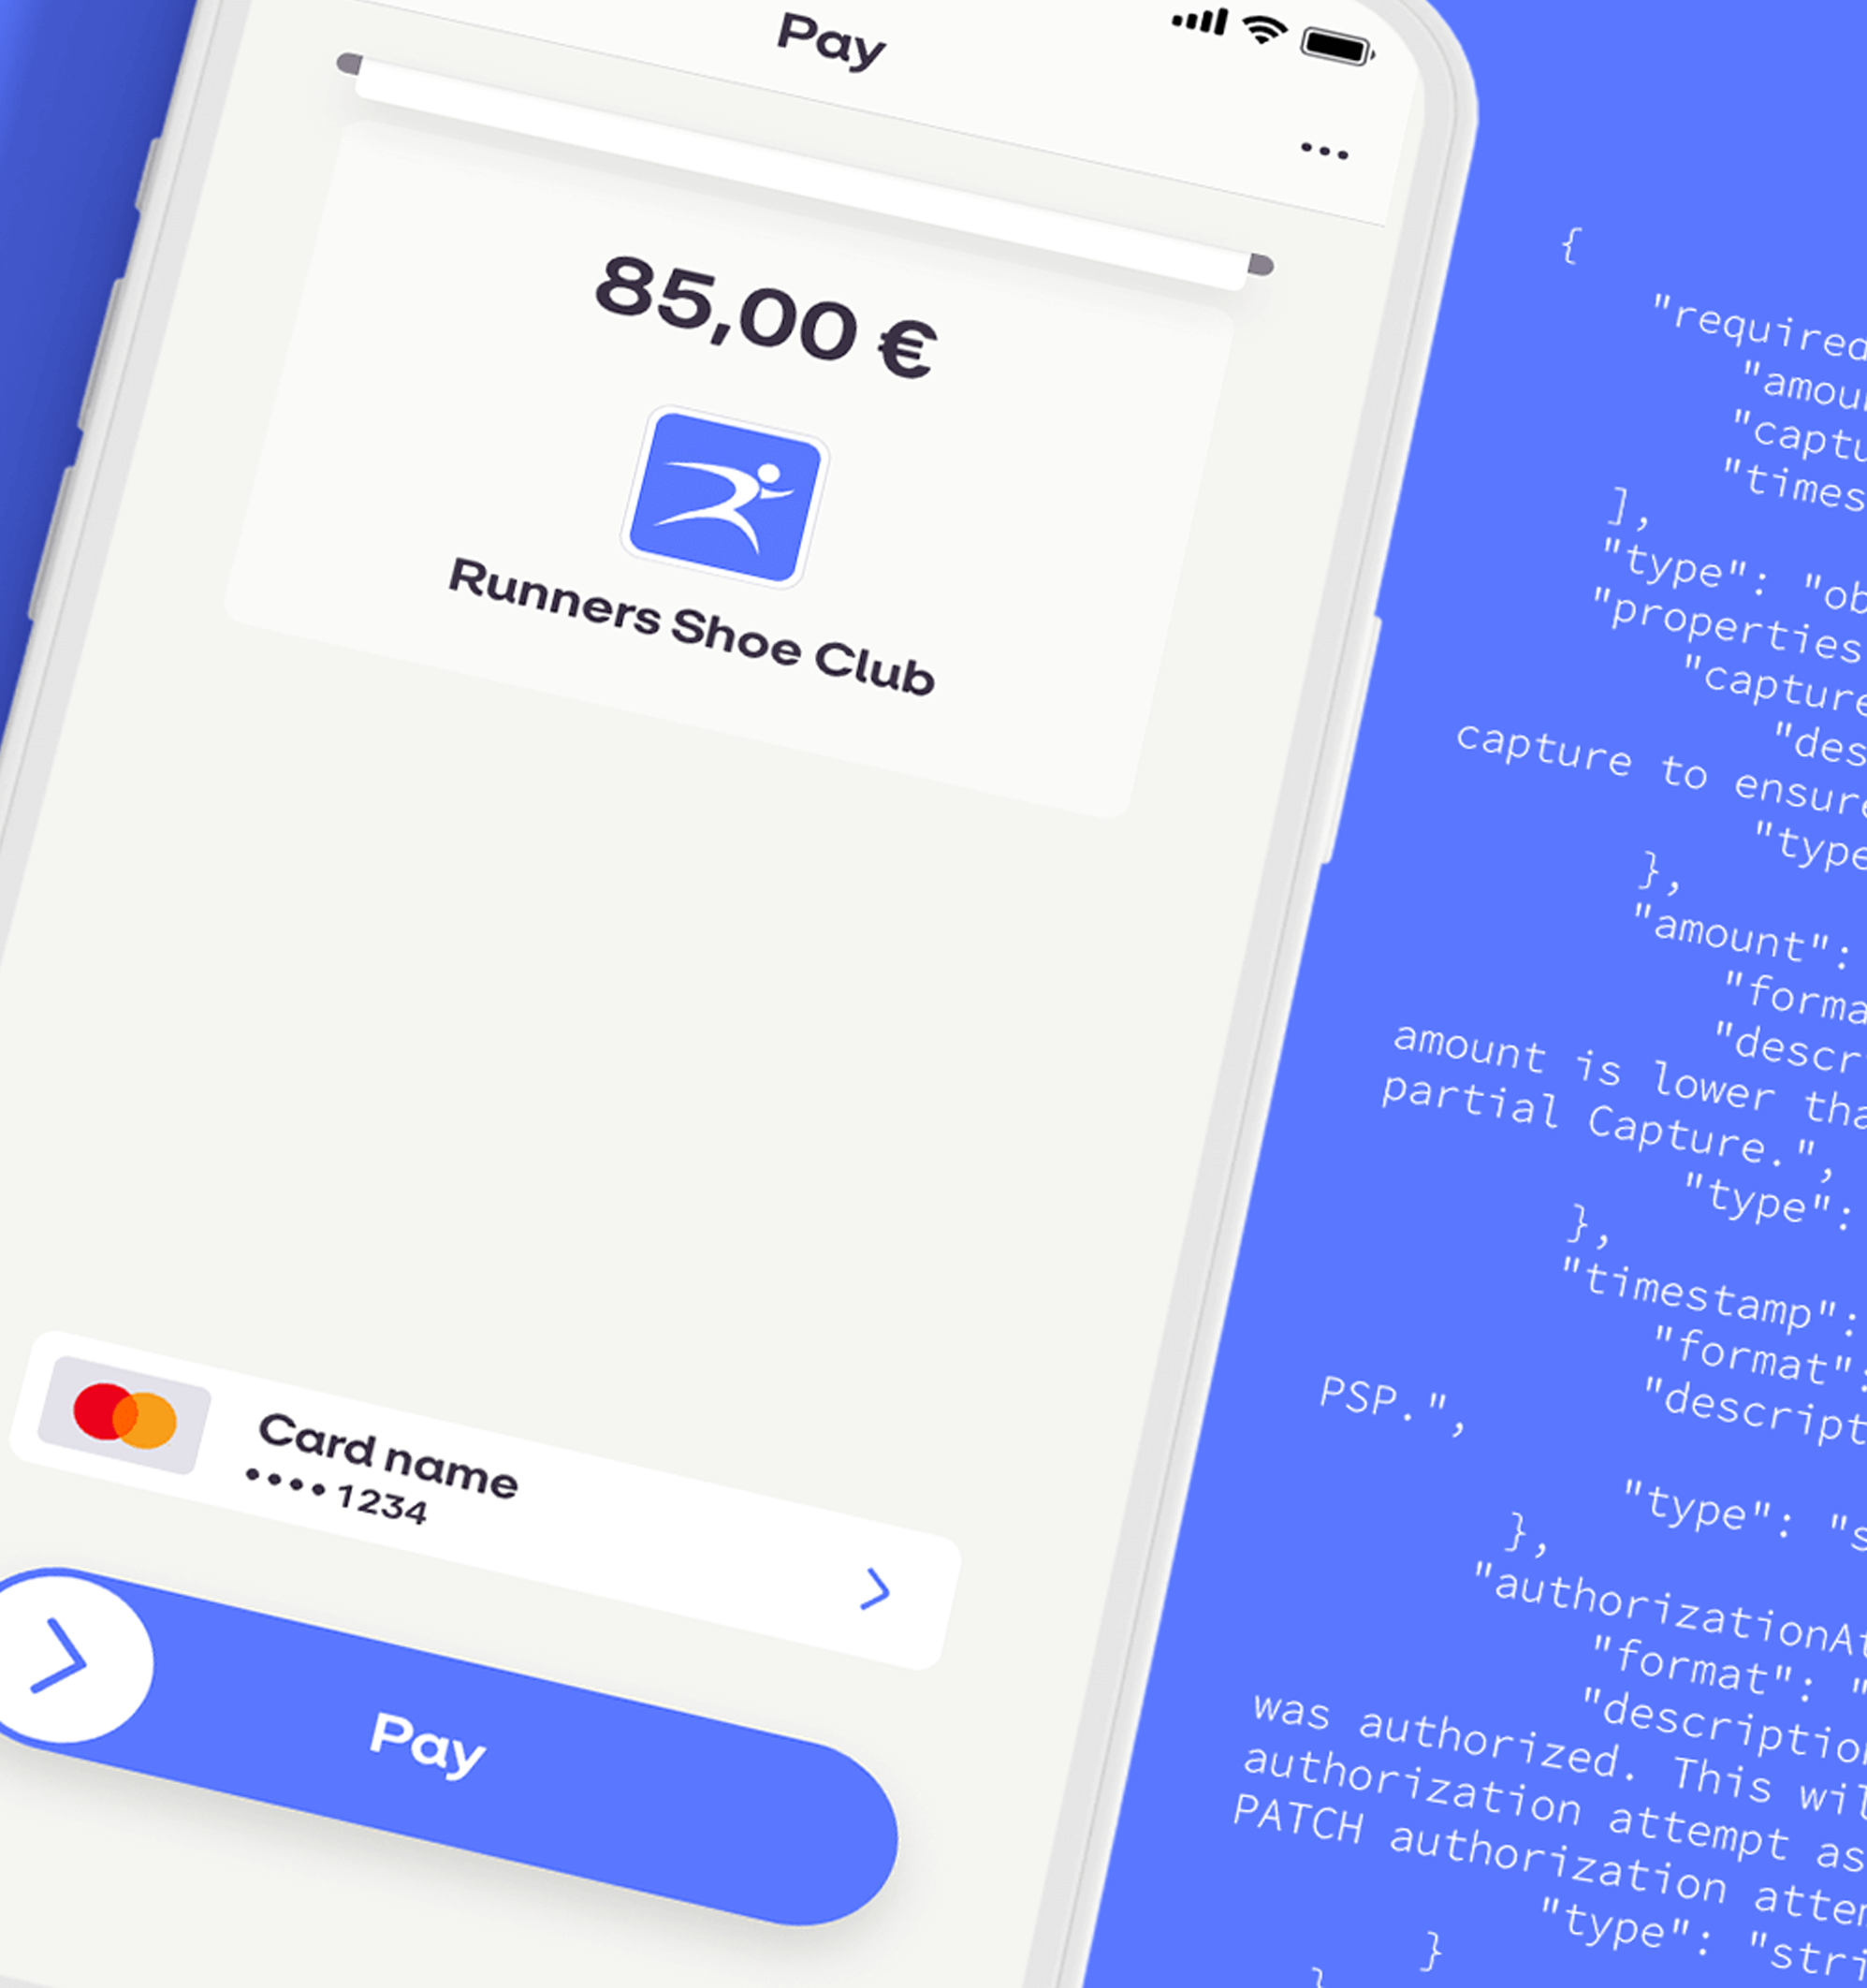 Create a simple ecommerce checkout flow with MobilePay